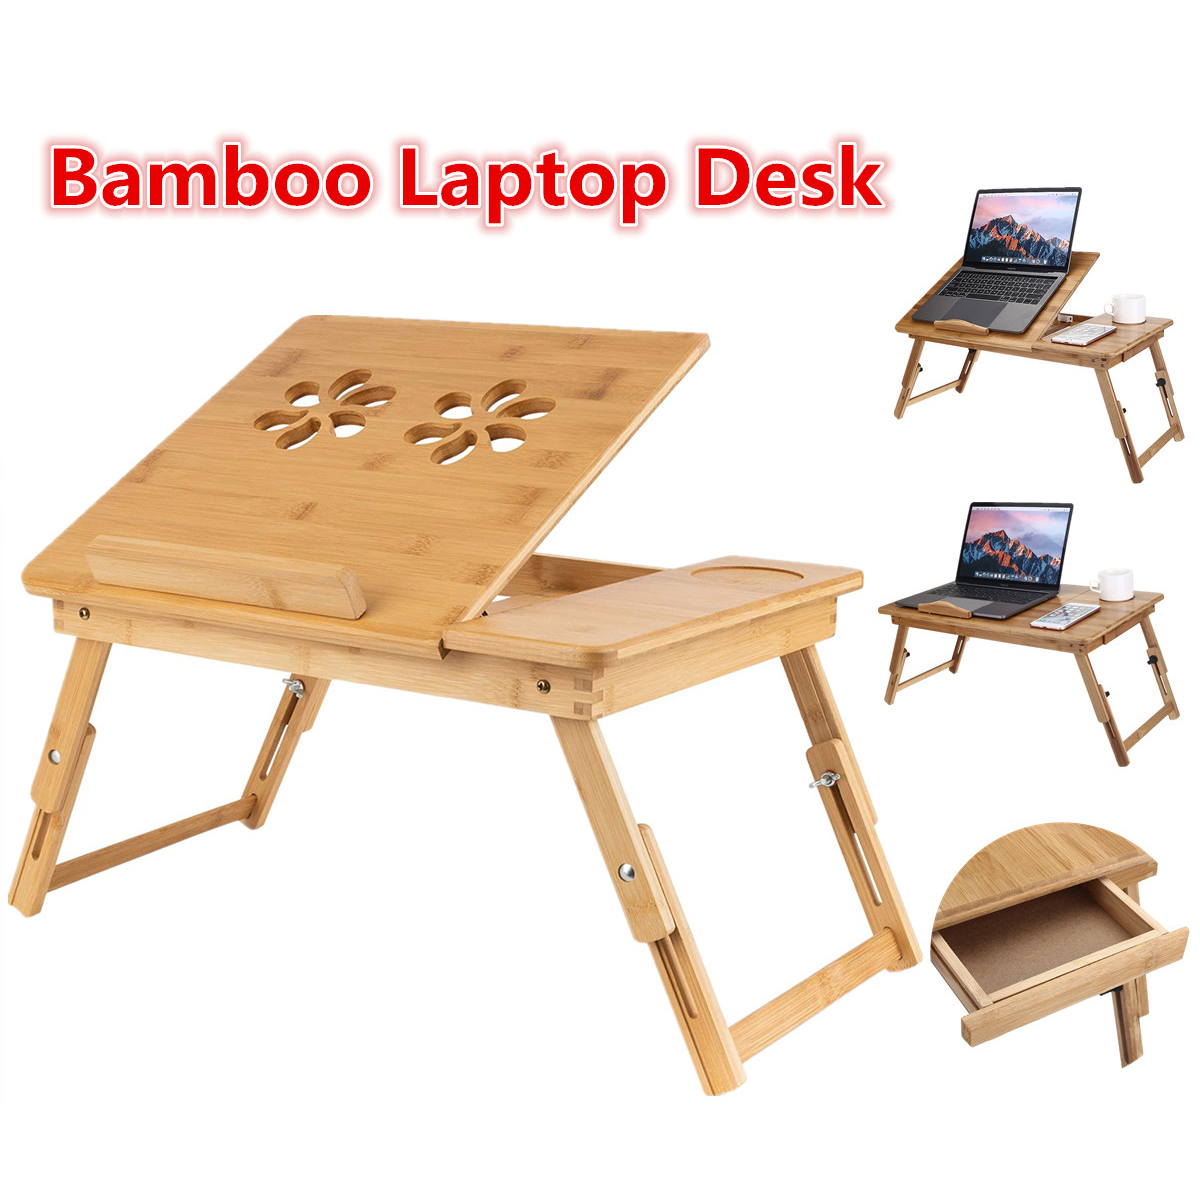 Bamboo-Laptop-Desk-Stand-Lap-Desk-Table-Flower-Pattern-Foldable-Breakfast-Serving-Bed-Tray-with-Stor-1798257-1